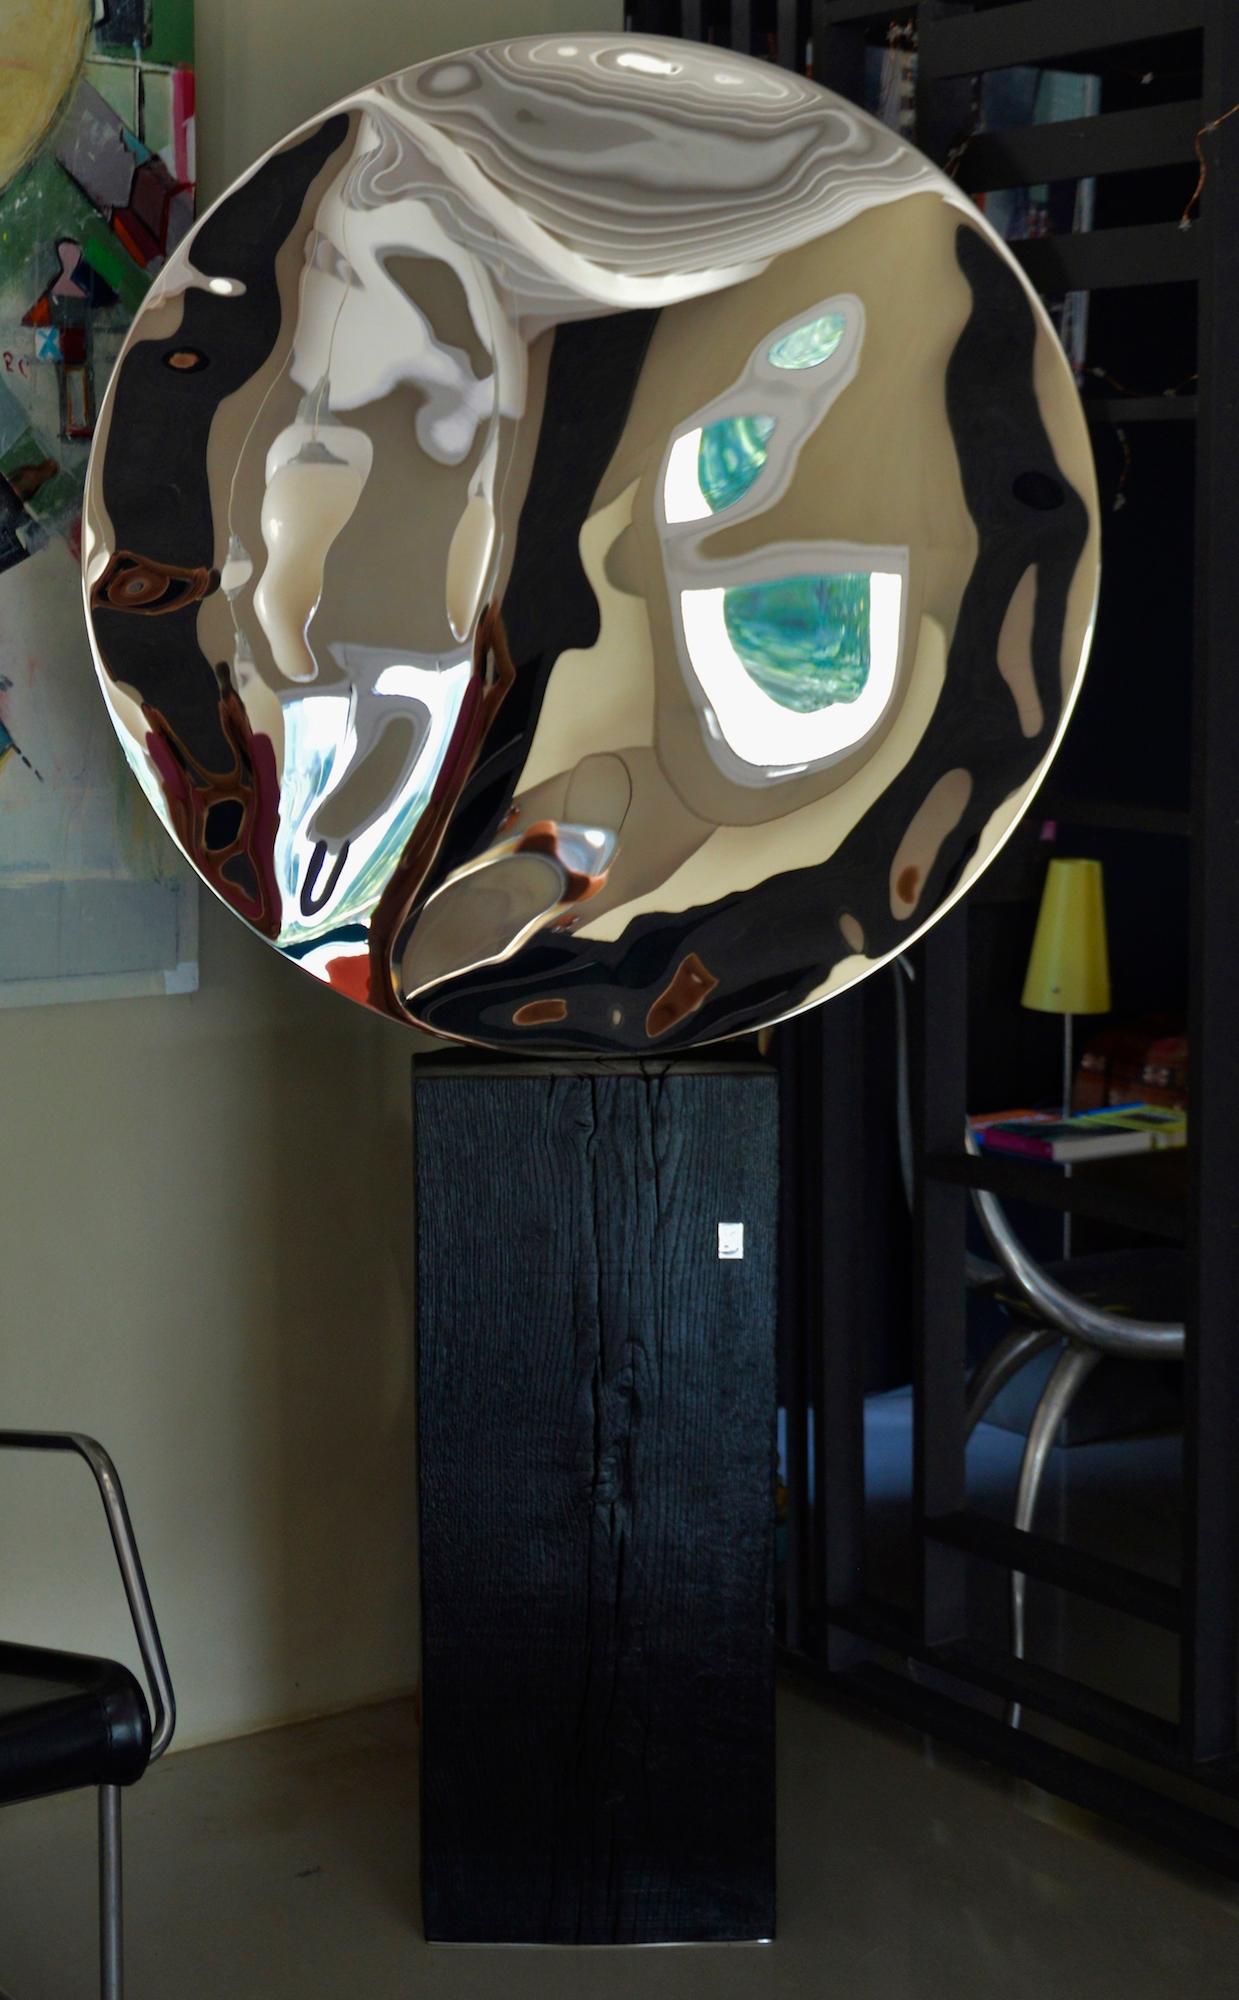 “Shattered” mirror II by Franck K - Stainless steel sculpture, reflection, light For Sale 3